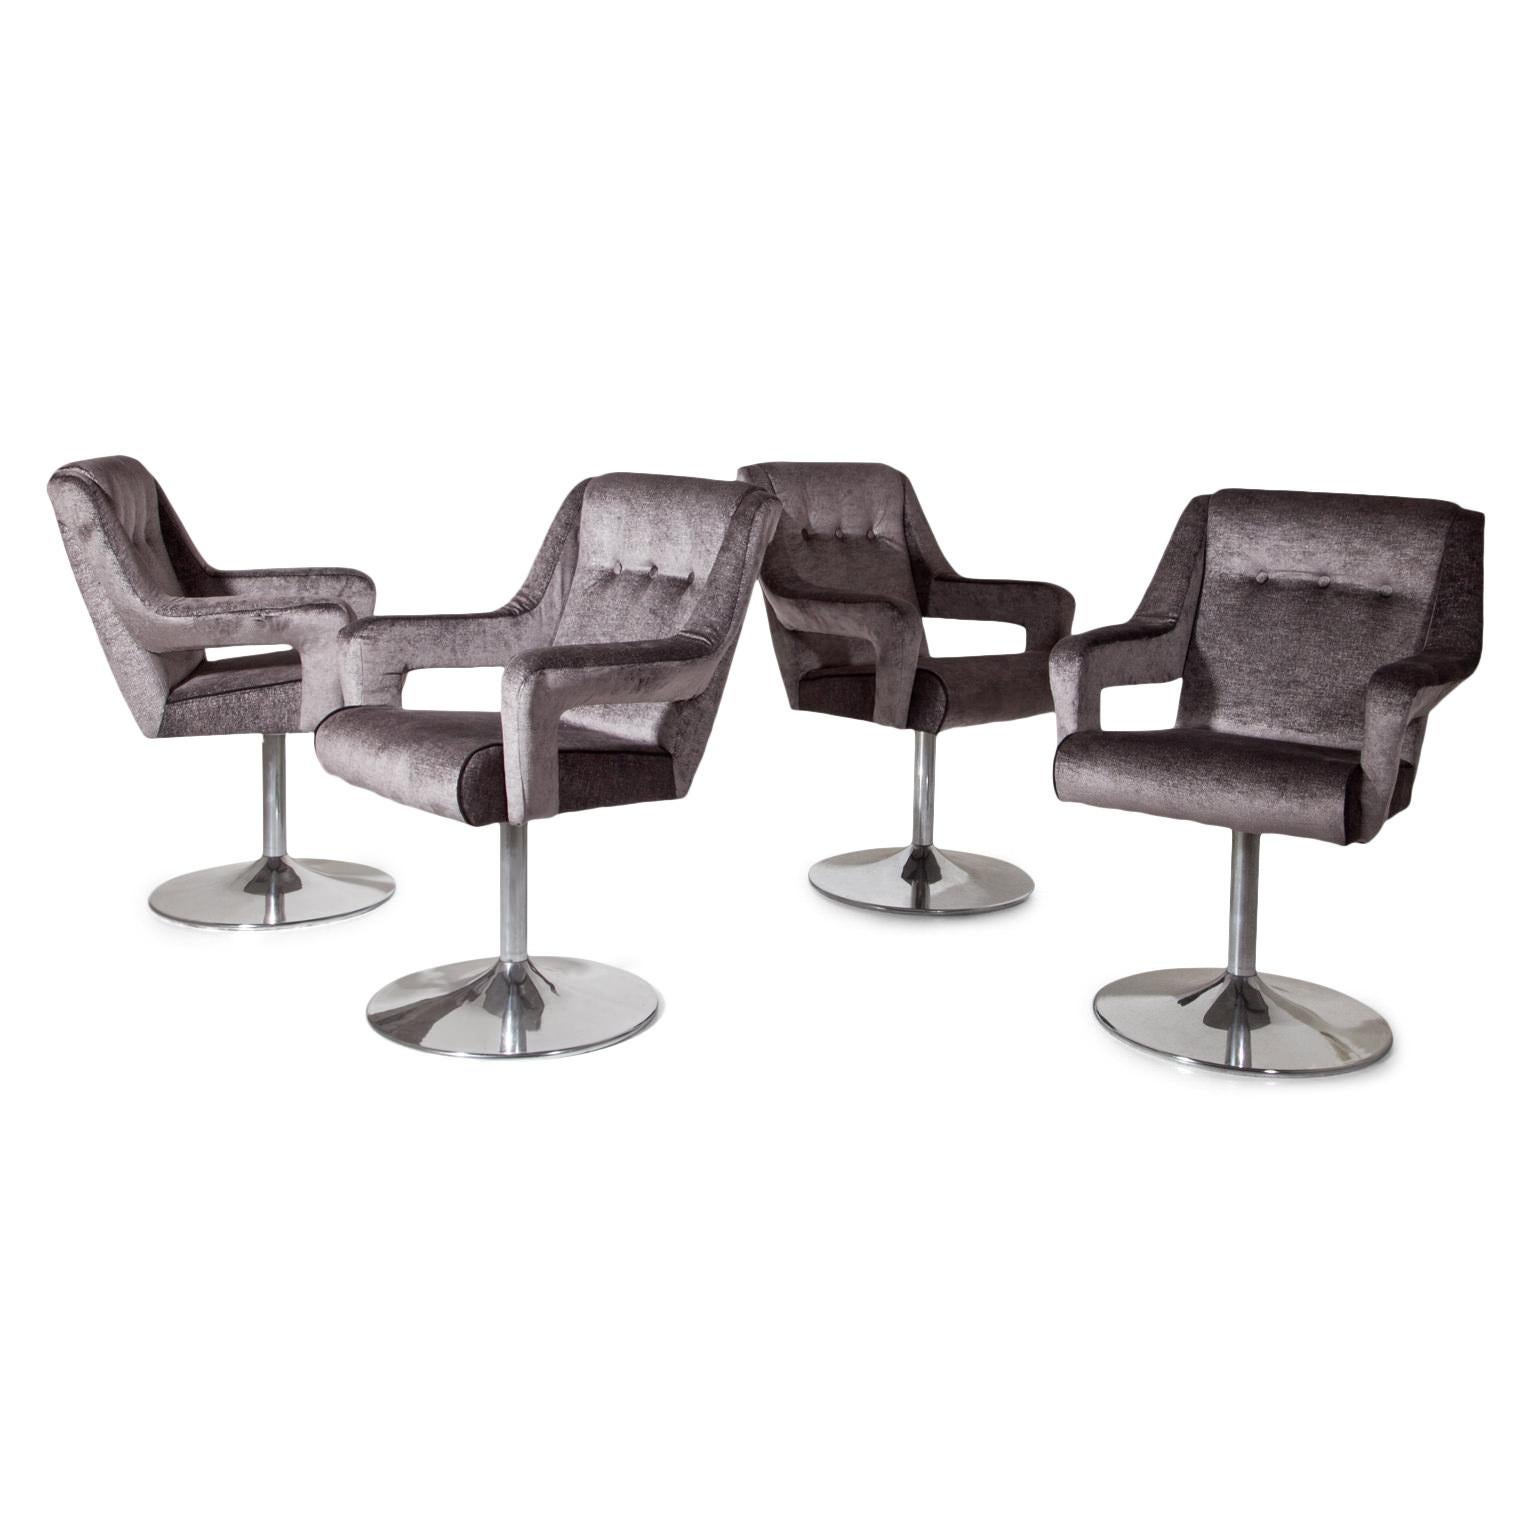 Set of 6 Swivel Chairs, Italy, Mid-20th Century